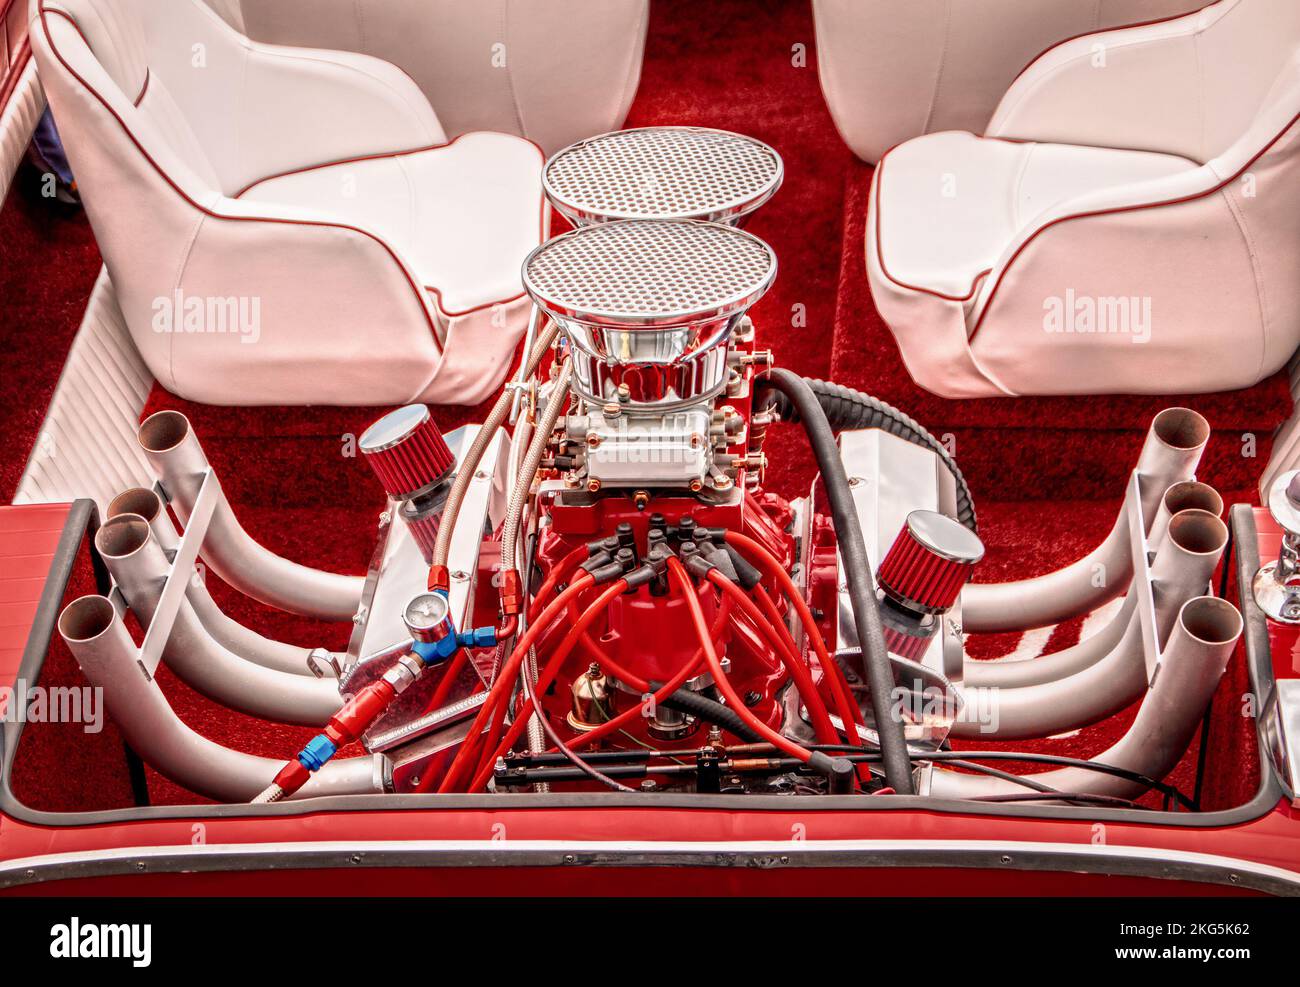 Open loud retro vintage red fiberglass speed boat motor with spark plugs and pipes in back behind seats - boat show Stock Photo